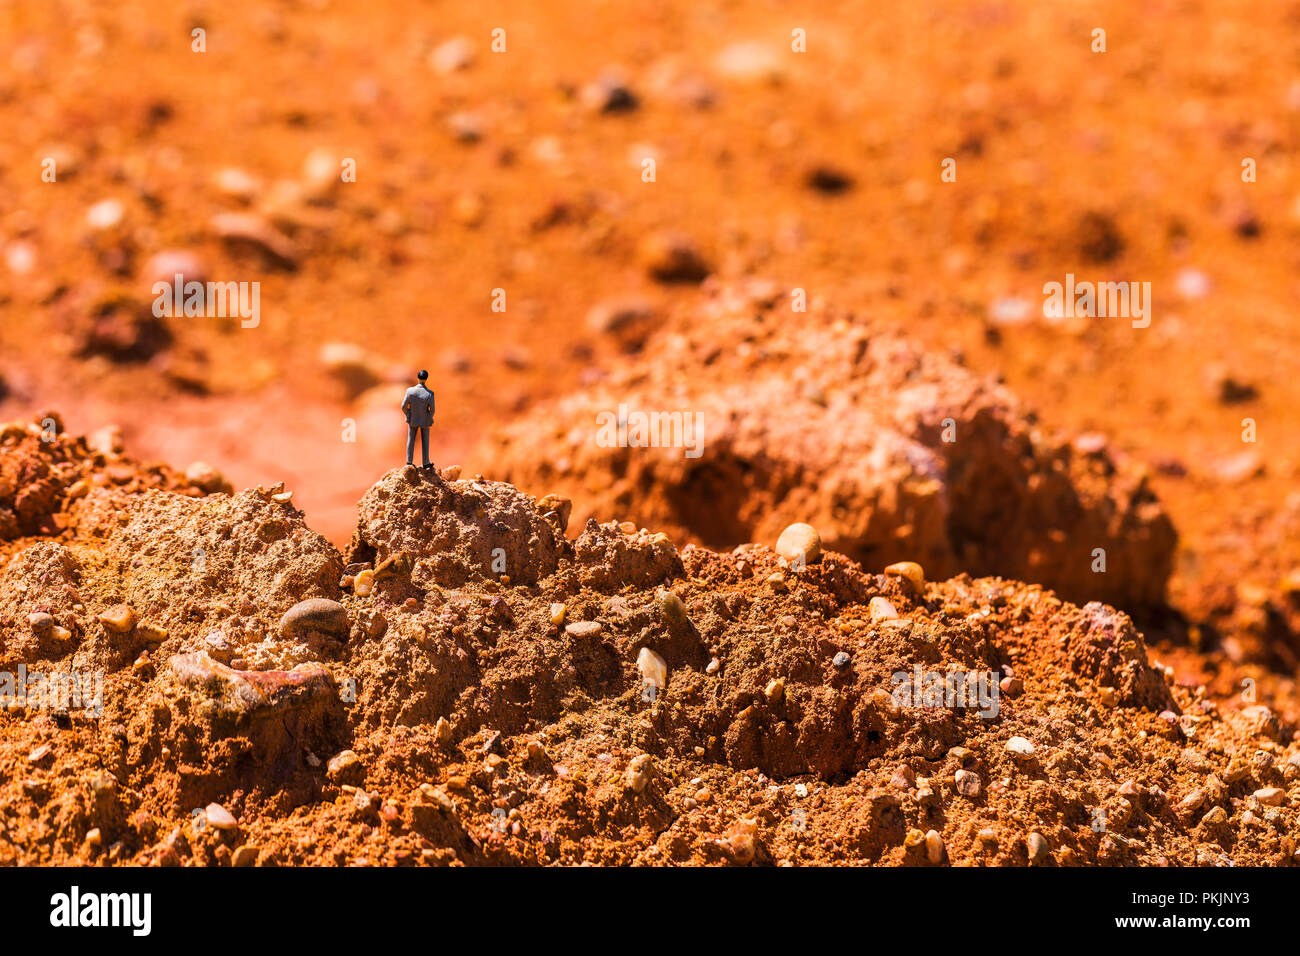 Business man on the rocky area is rocky. Imagine doing business on Mars. Stock Photo